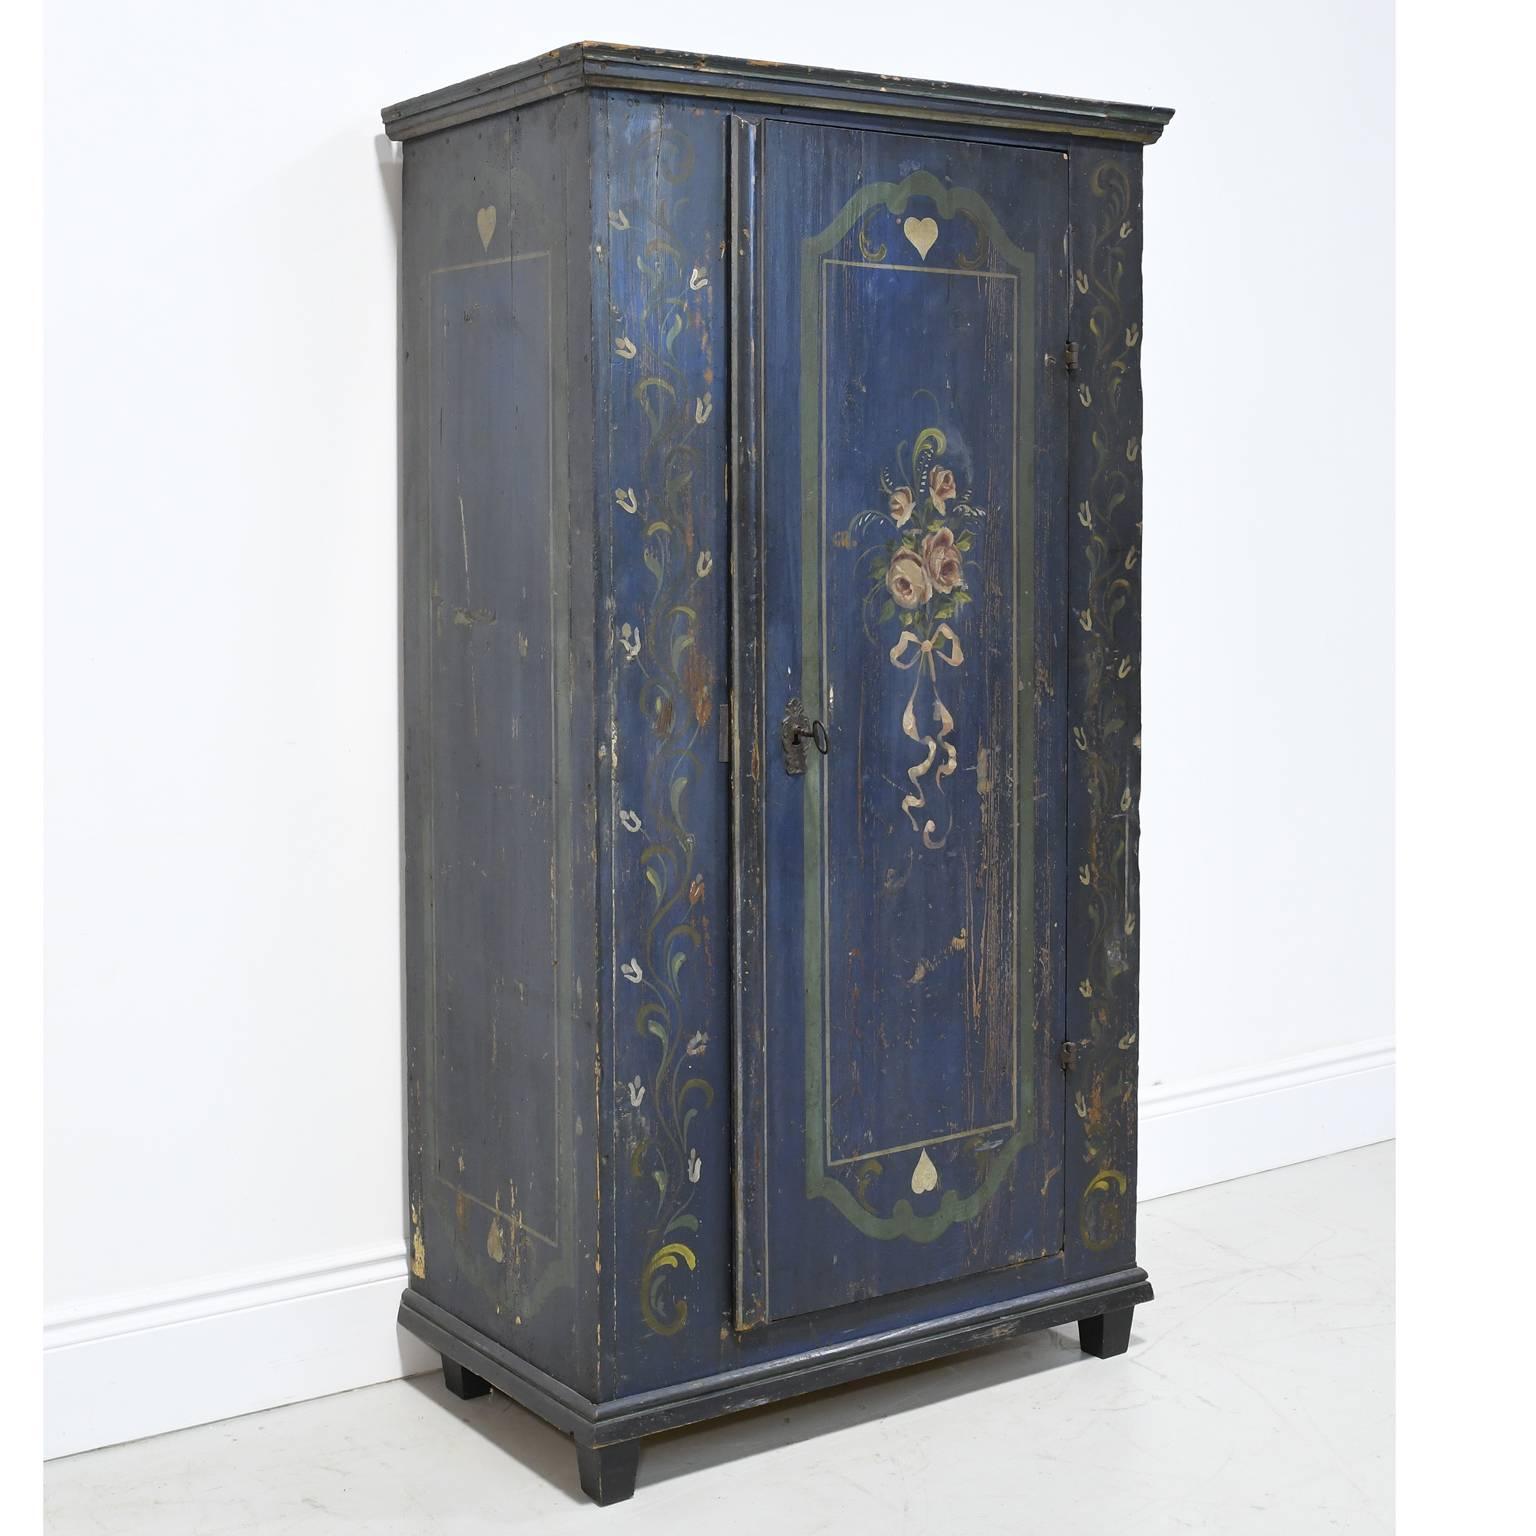 A very lovely dowry armoire with the original blue background paint embellished with hearts, foliage and a bundle of pink roses tied with a pink ribbon. Austrian or German, circa late 1700s to early 1800s. Interior offers five adjustable